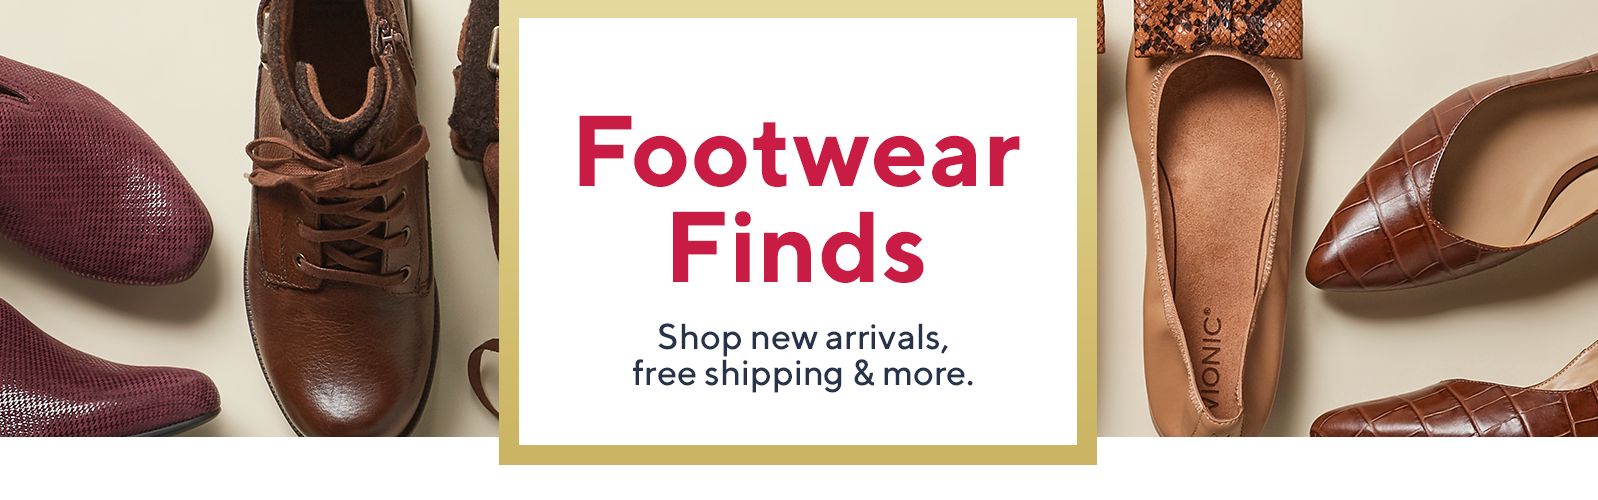 qvc clearance ladies shoes